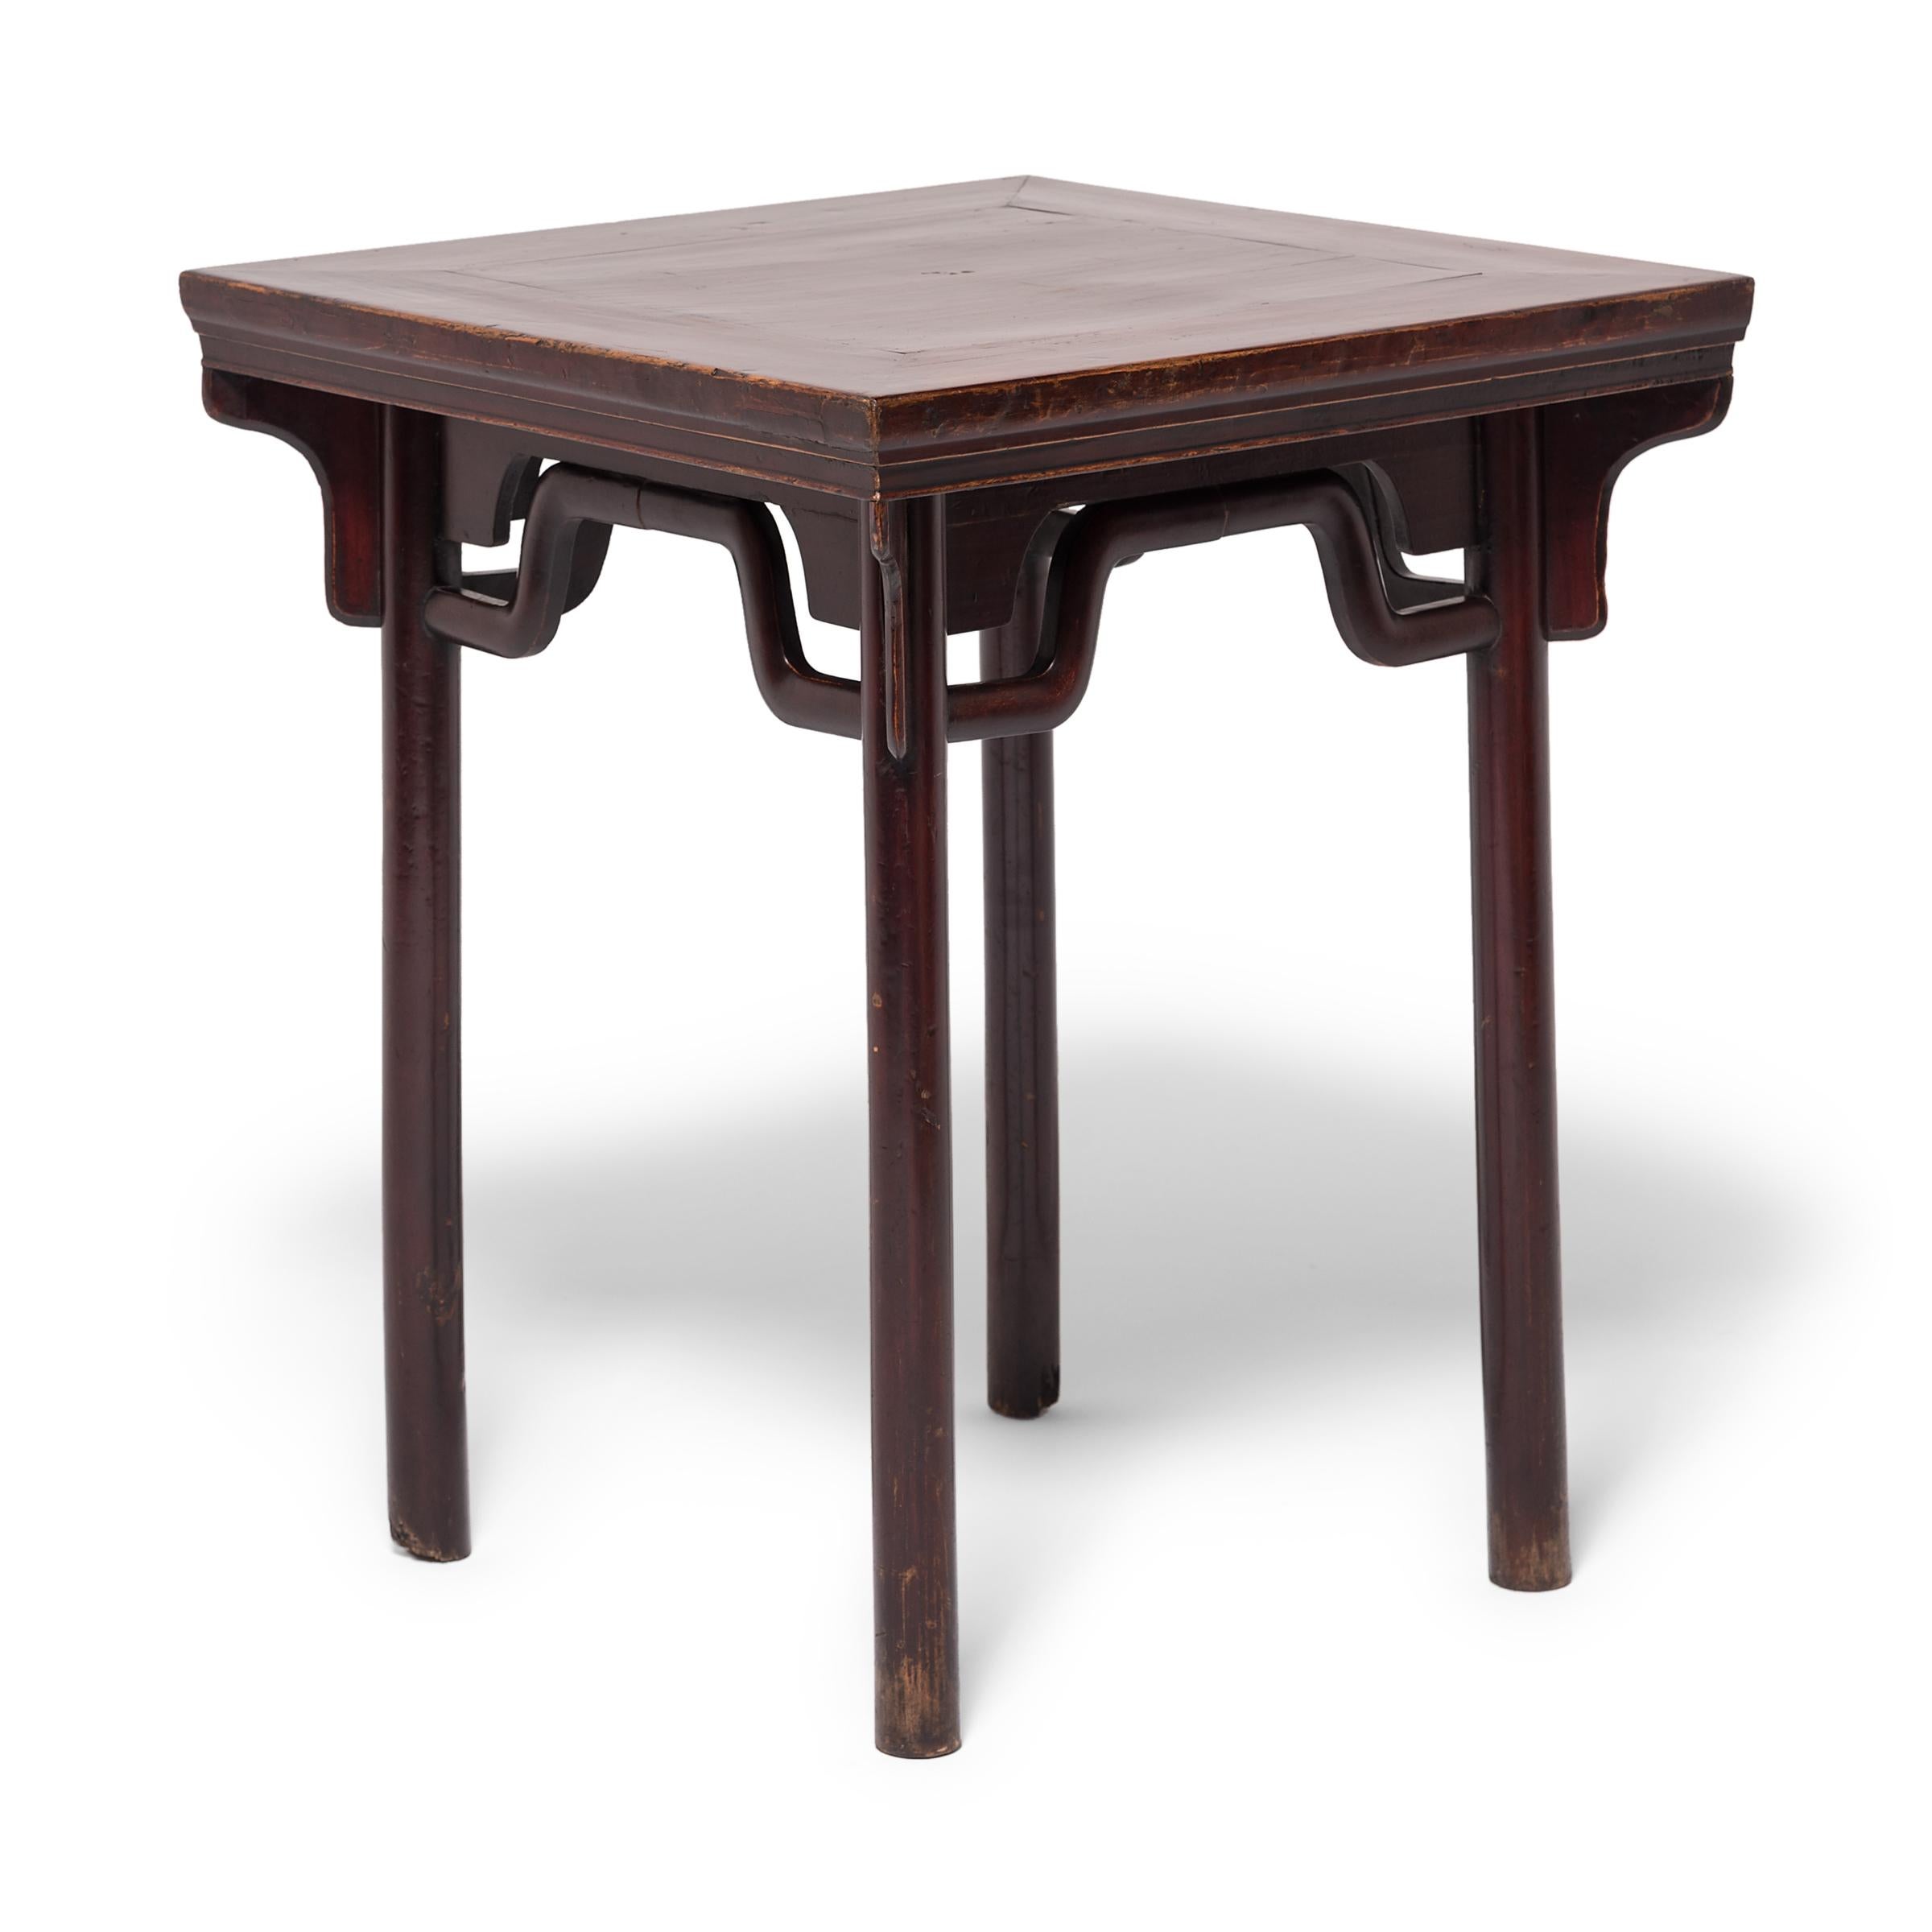 Though created in the Qing dynasty, this square table owes its elegant proportions to Classic Ming dynasty design principles. Ming table design was centered on a harmonious blend of straight and curved lines. This table's tall, slender legs